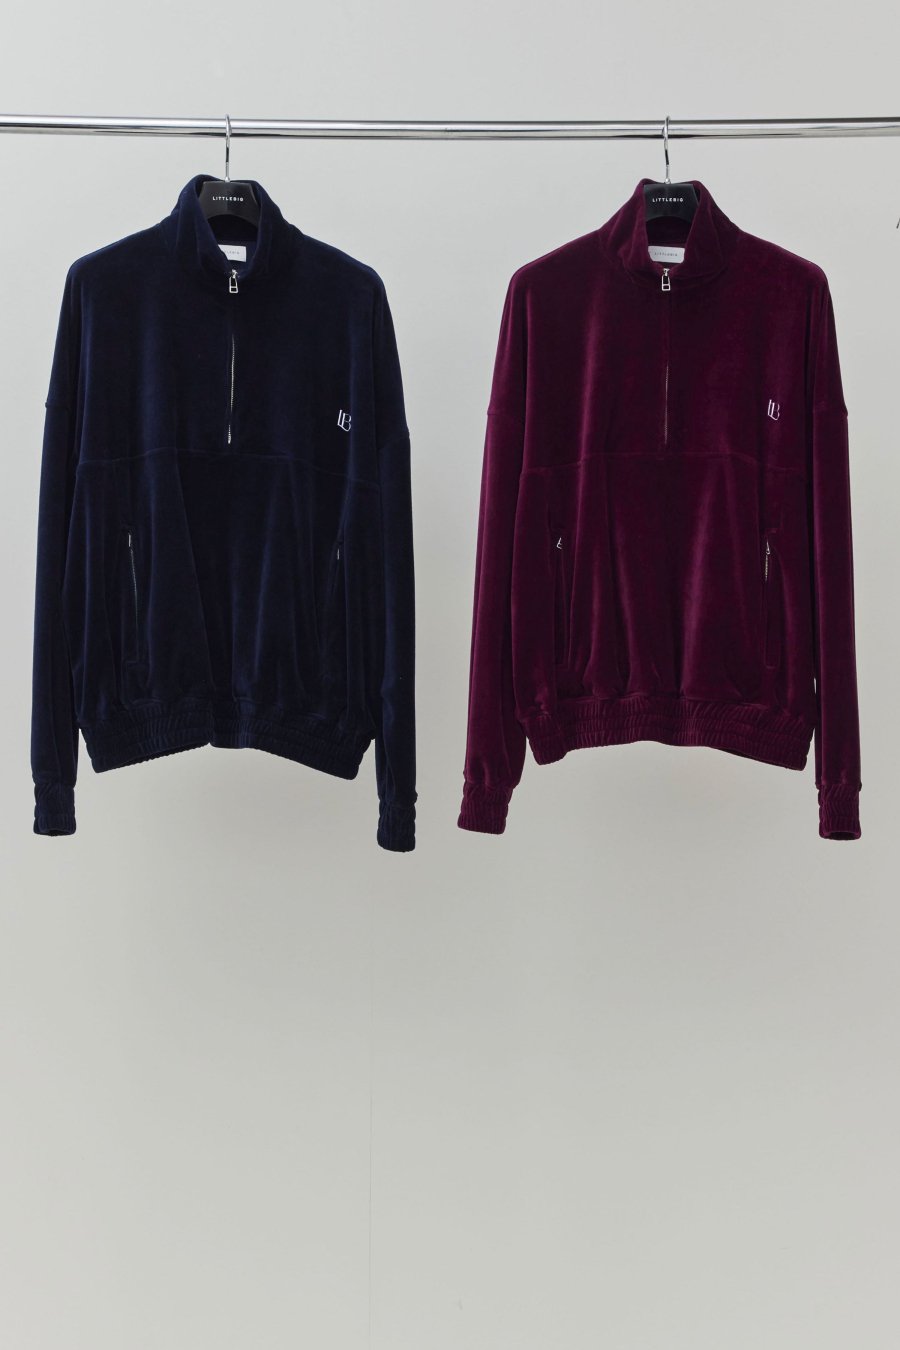 LITTLEBIG 22AW Velour Track Top(Bordeaux)<img class='new_mark_img2' src='https://img.shop-pro.jp/img/new/icons15.gif' style='border:none;display:inline;margin:0px;padding:0px;width:auto;' />